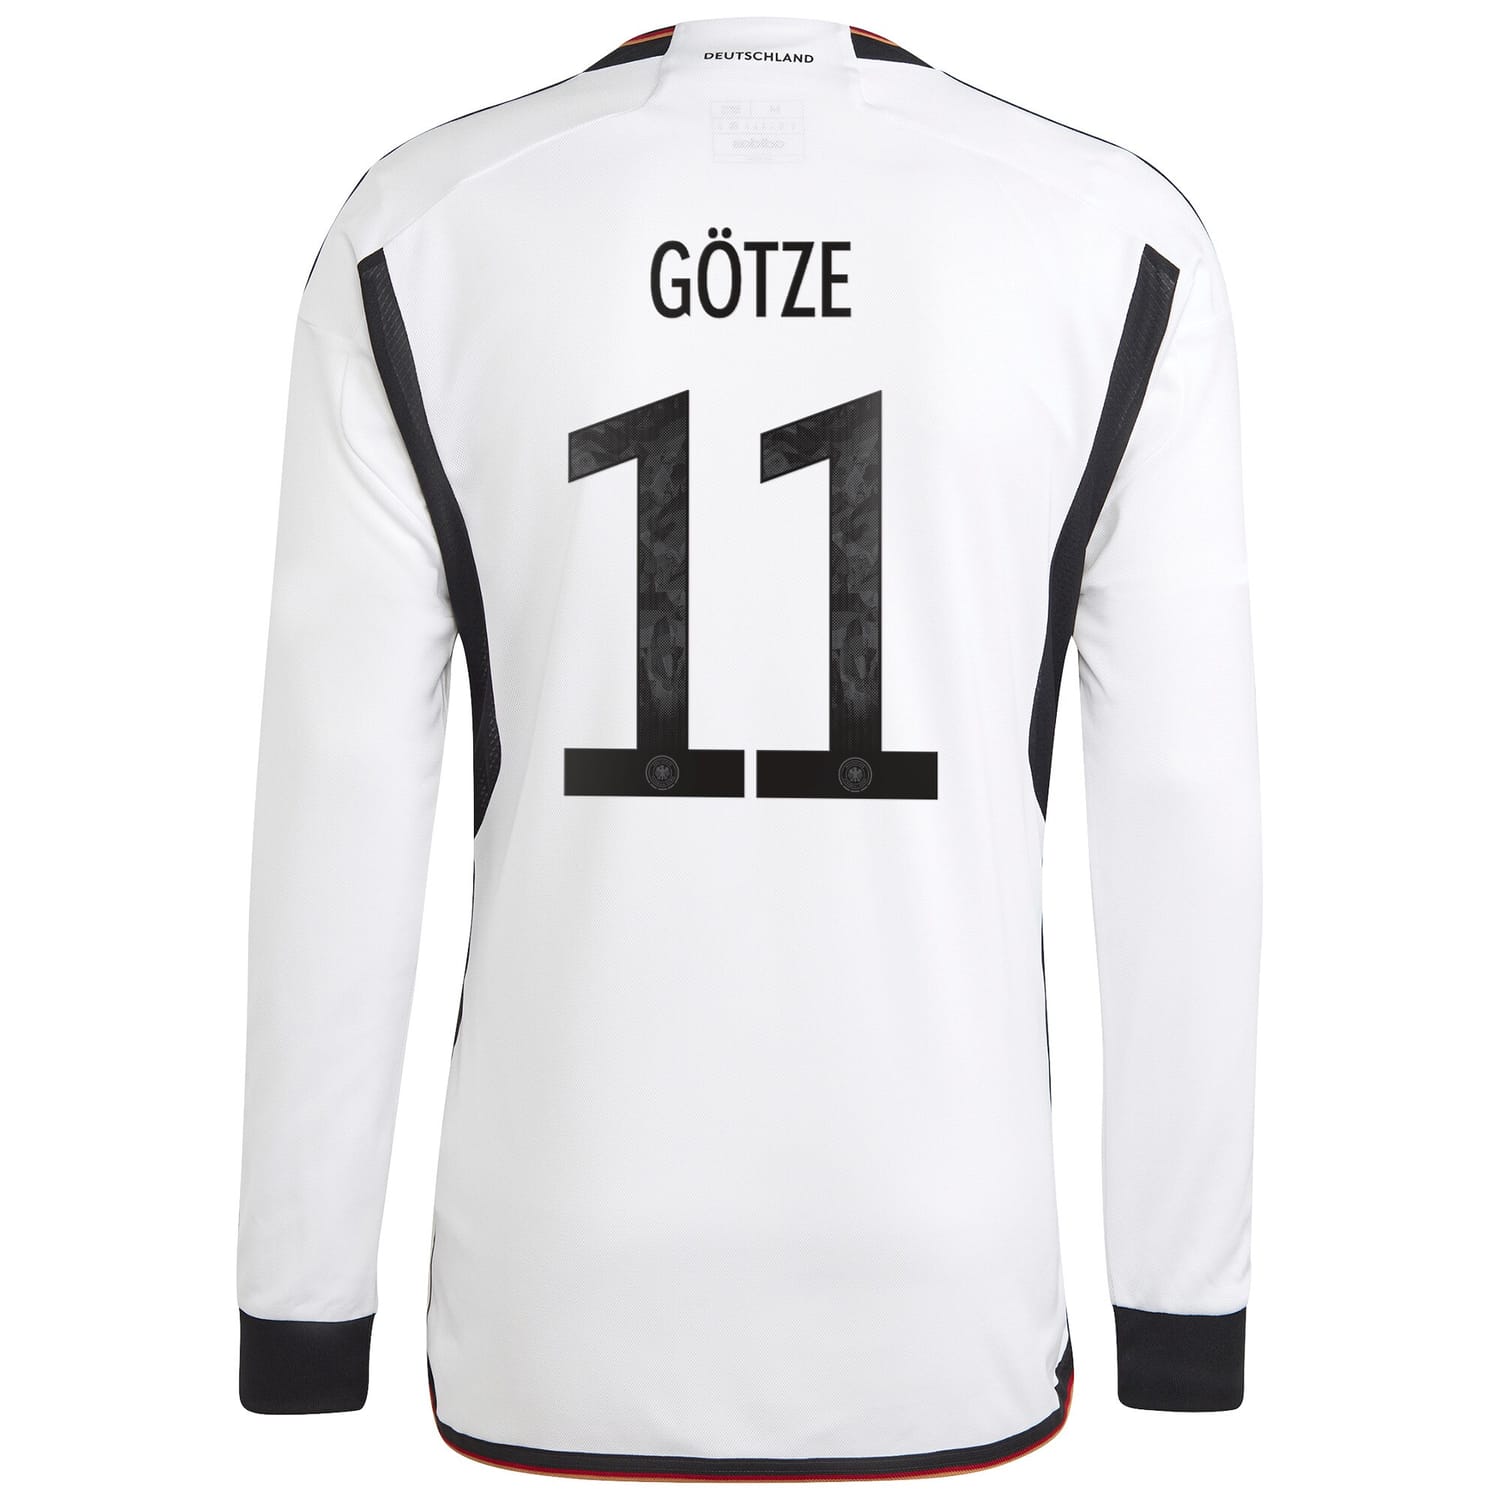 Germany National Team Home Jersey Shirt Long Sleeve 2022 player Mario Götze 11 printing for Men